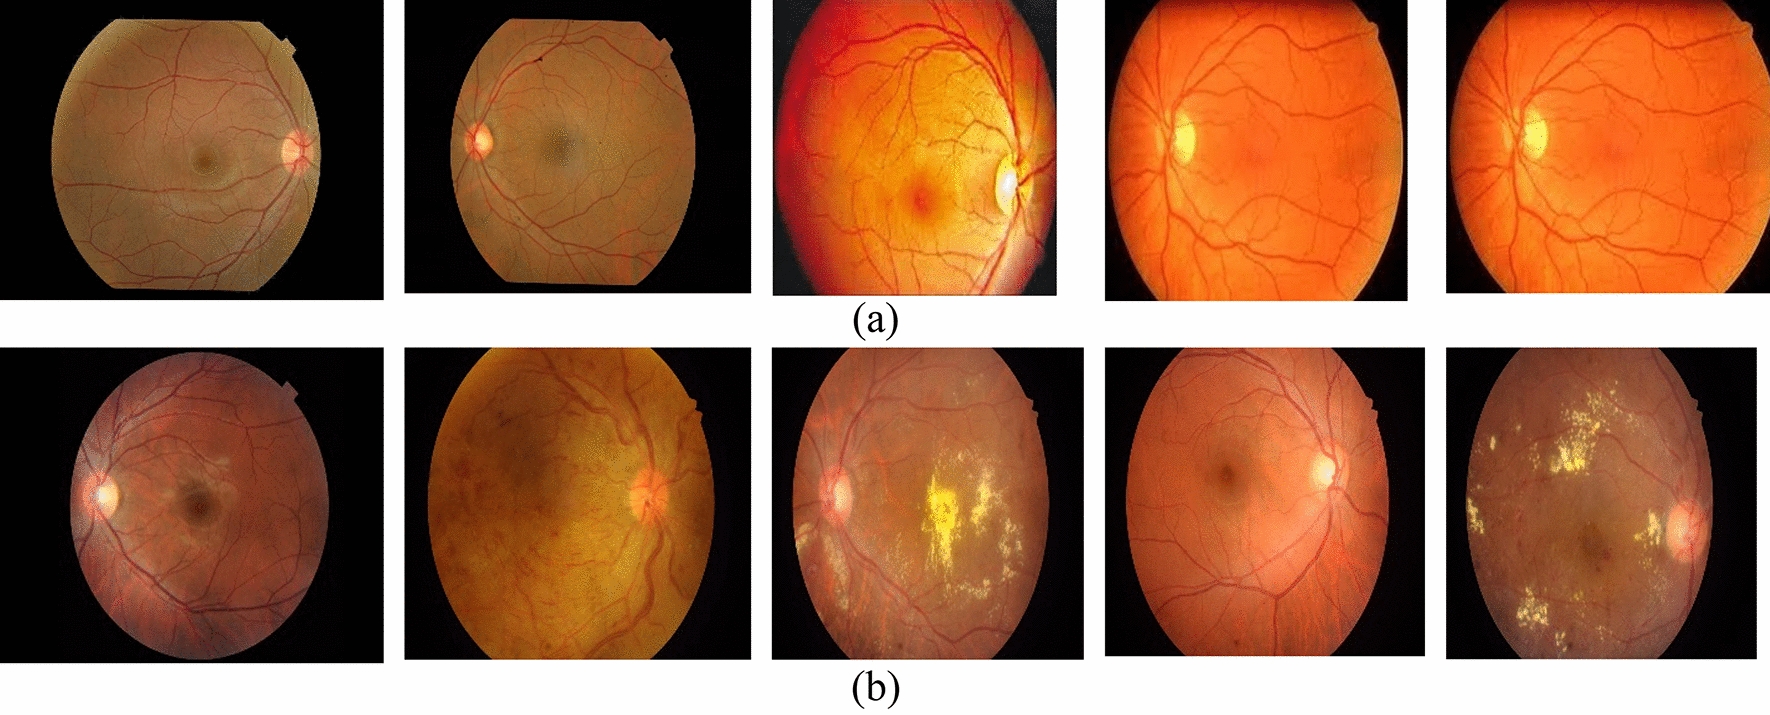 Diagnosis of retinal damage using Resnet rescaling and support vector machine (Resnet-RS-SVM): a case study from an Indian hospital